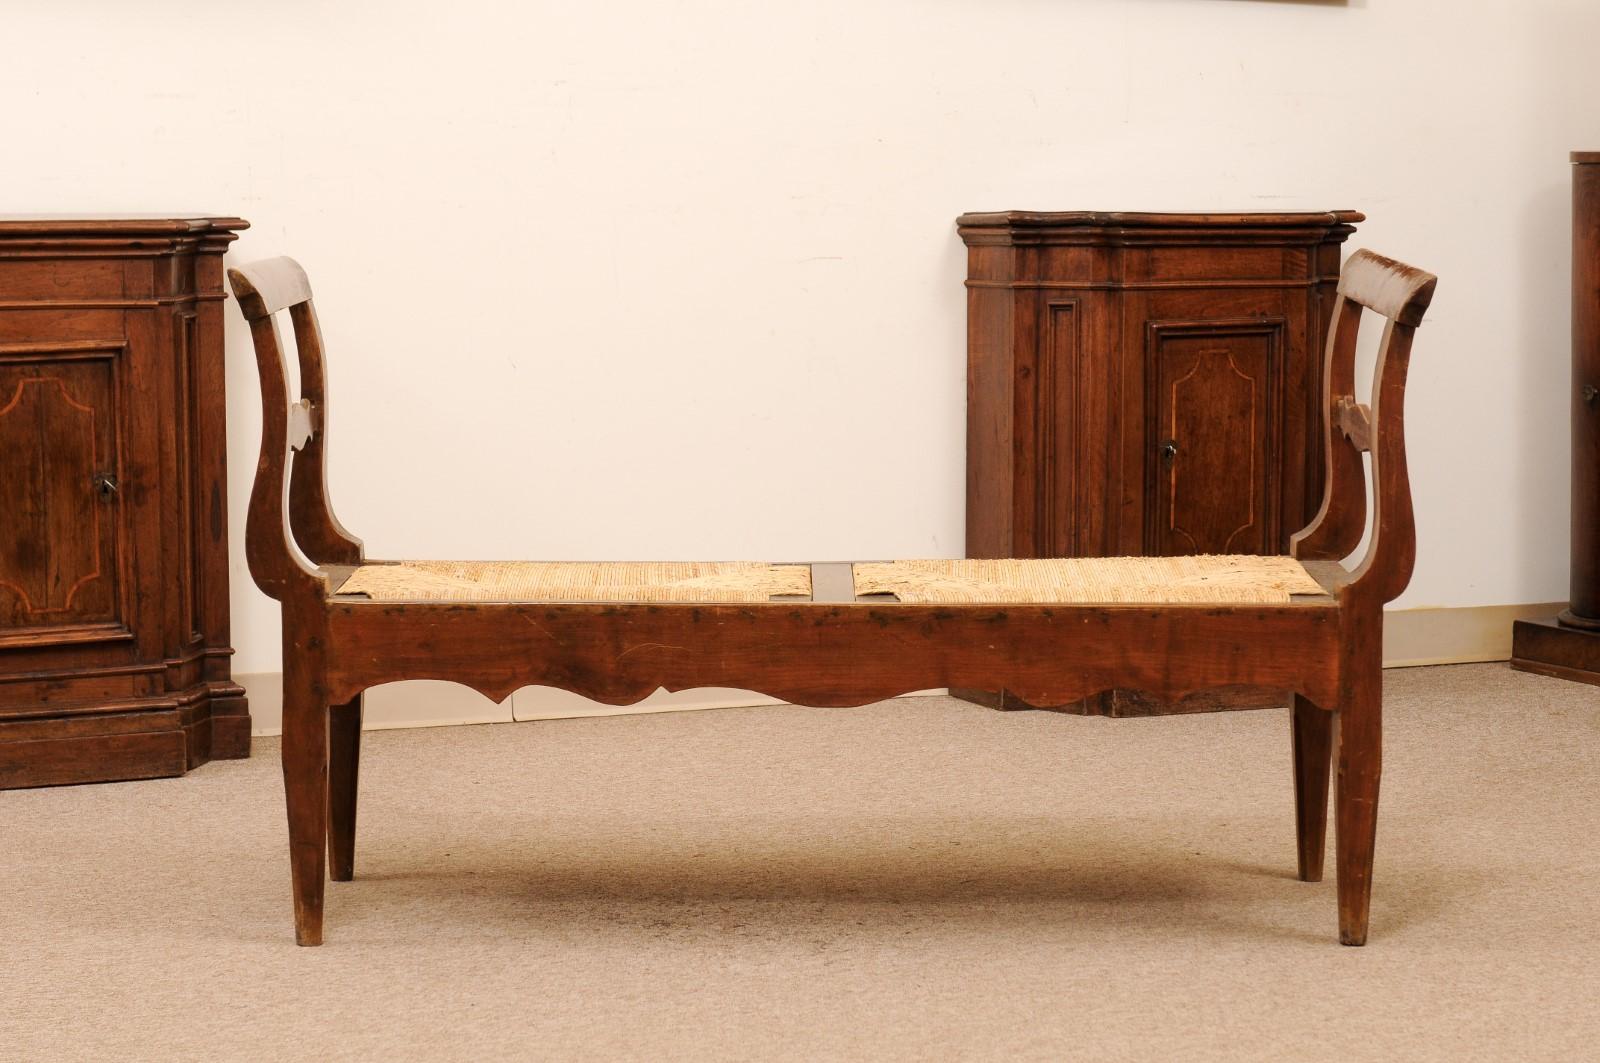  Long Early 19th C French Louis Philippe Fruitwood & Rush Seat Window Bench 8